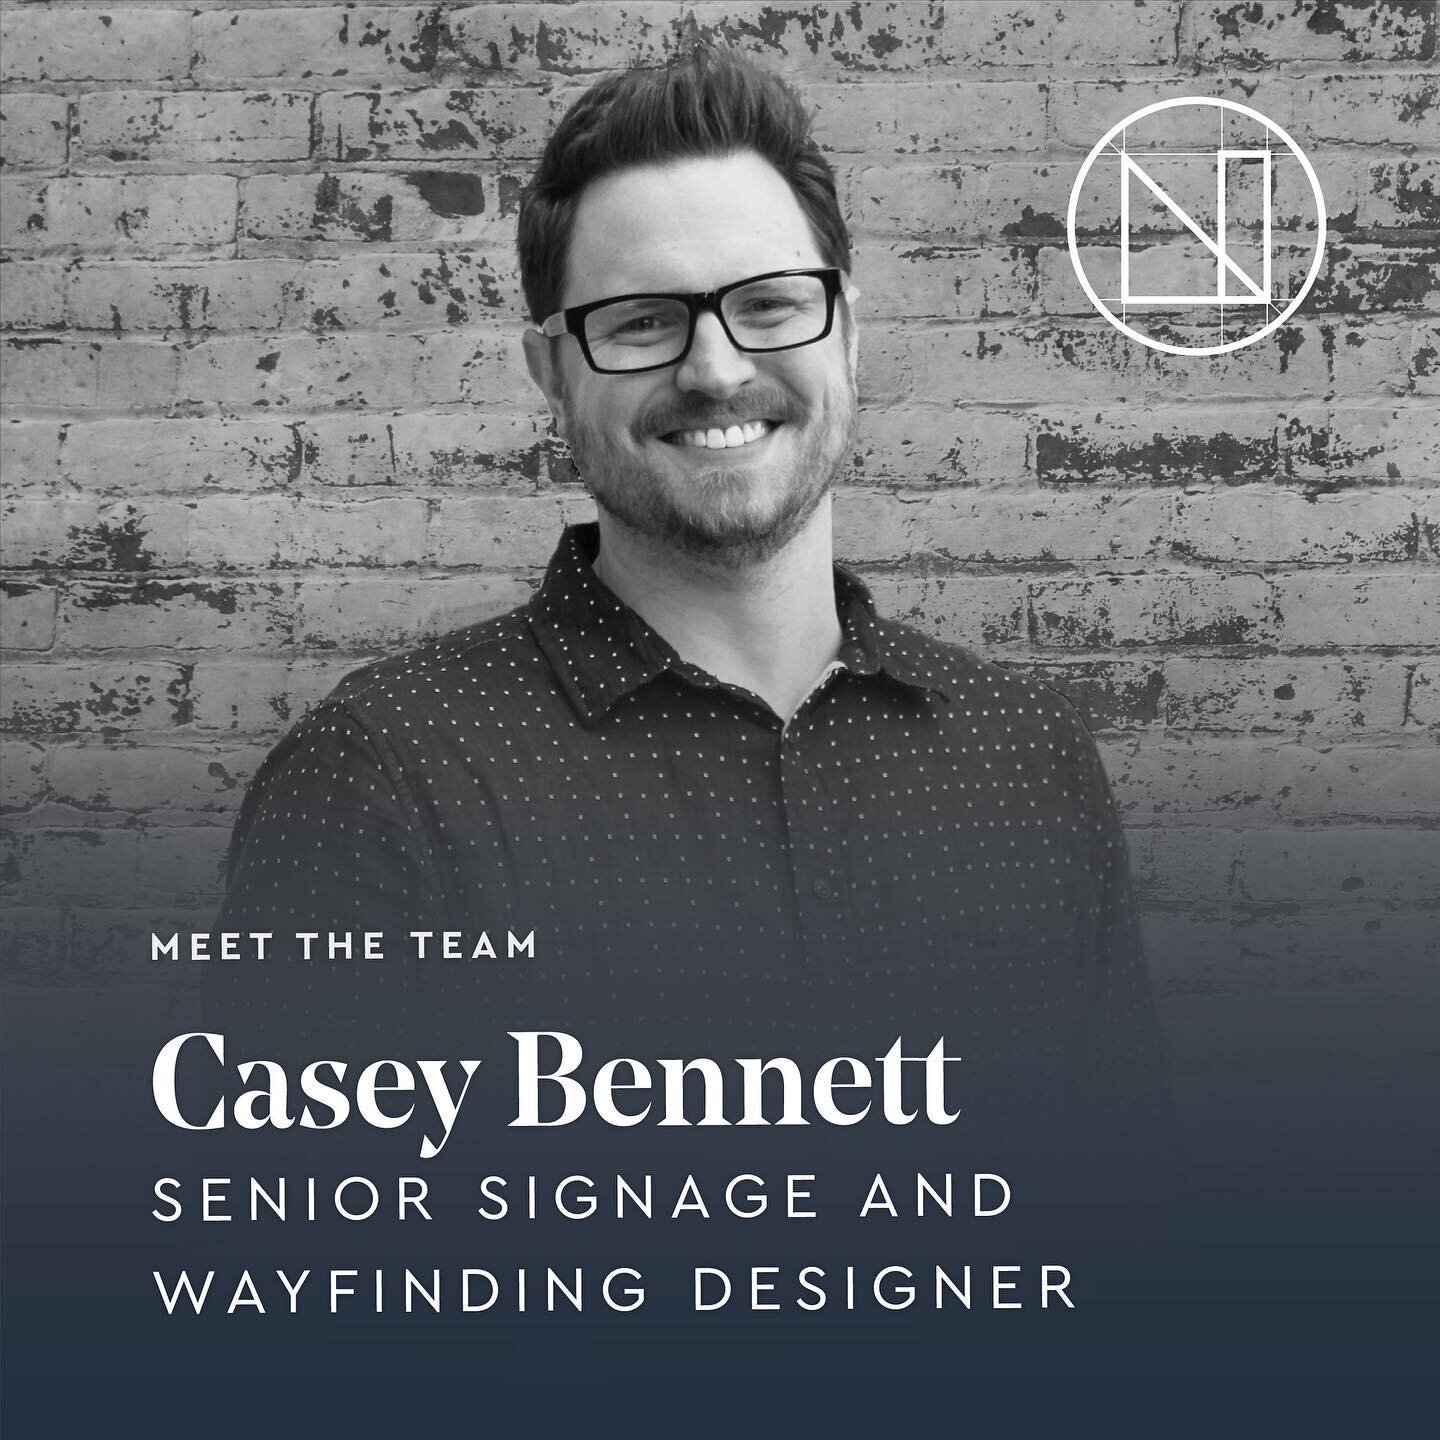 New year, new studio and a few fresh faces to introduce here at @nimbledesignco 📌. First up, @patrickcaseybennett &mdash; Senior Signage and Wayfinding Designer.

60 days in to his new role at Nimble. we interviewed Casey to learn how it&rsquo;s goi